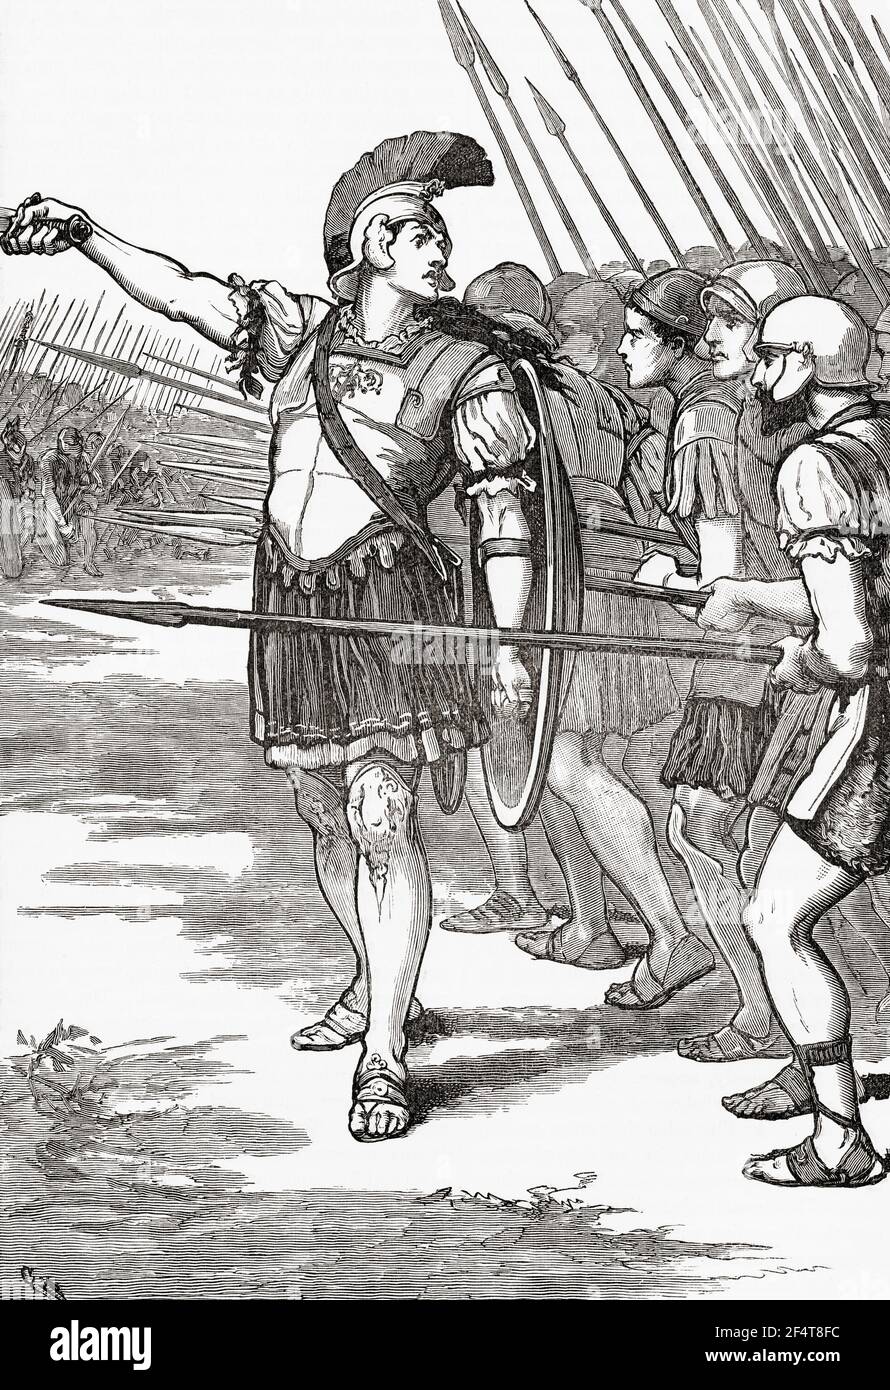 Pelopidas leading the Thebans at the Battle of Leuctra, 6 July, 371 BC.  From Cassell's Universal History, published 1888. Stock Photo